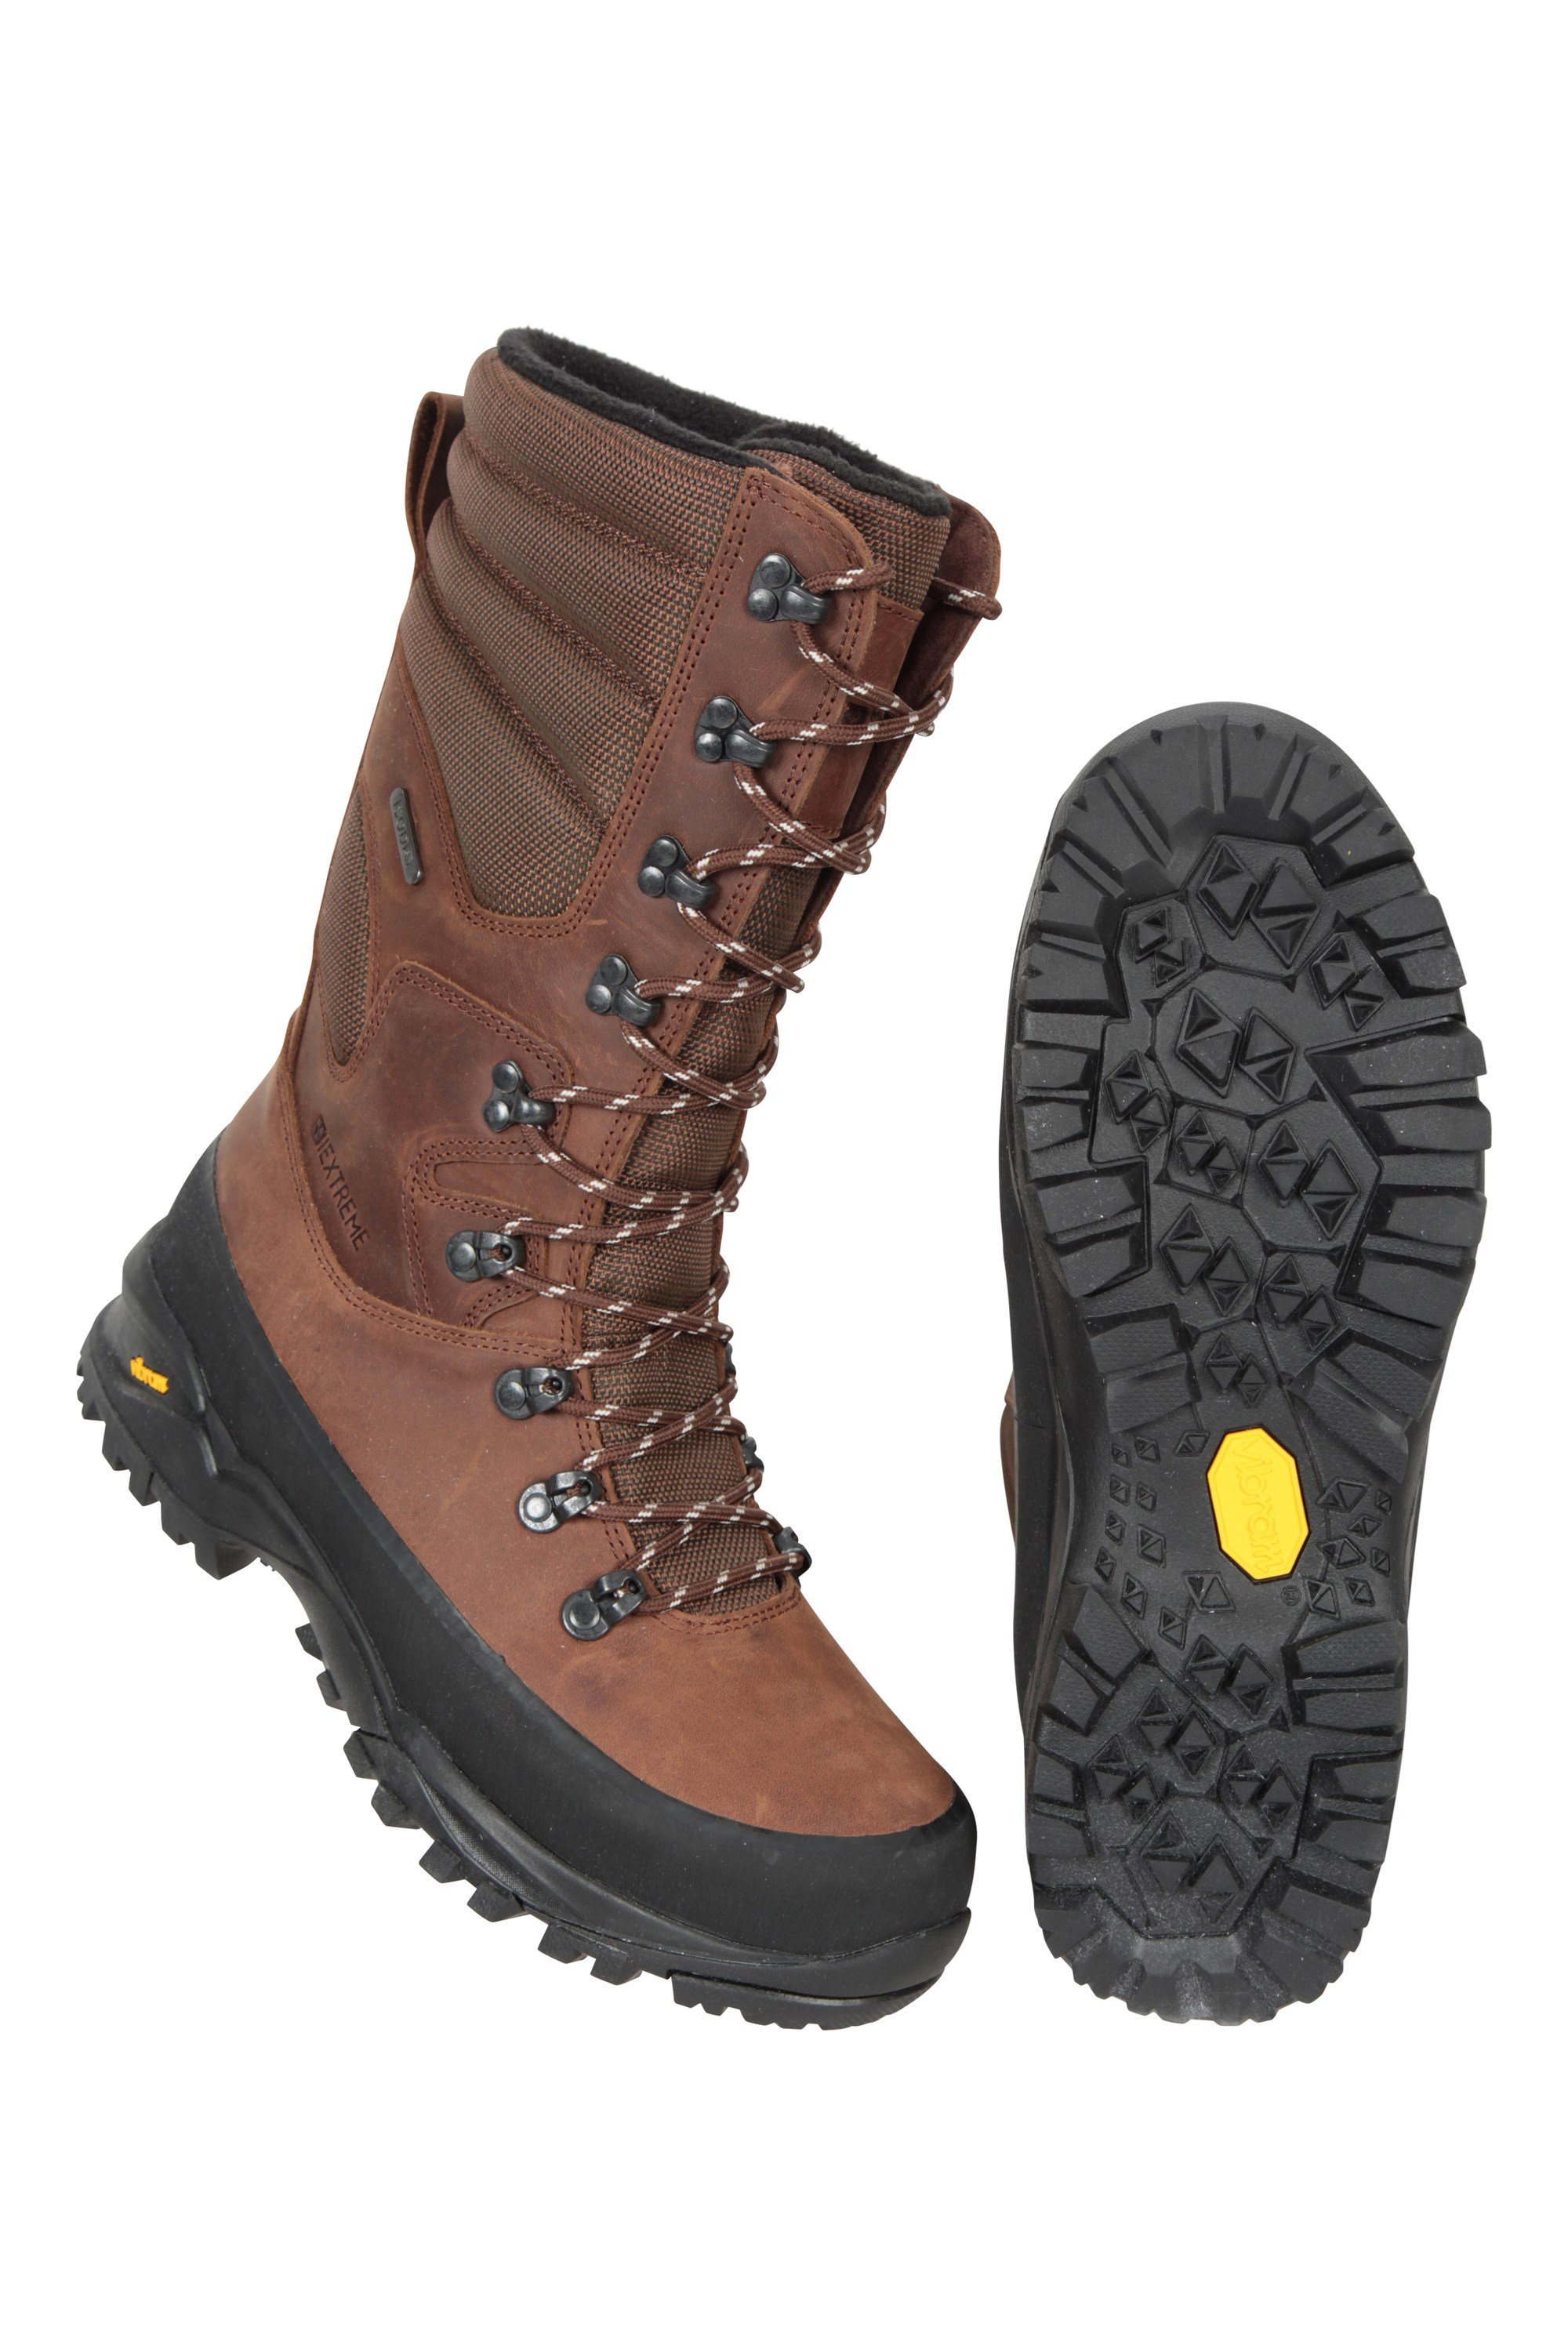 Mountain Warehouse Mens IsoDry Waterproof with Snow Boots and Suede Upper Design 